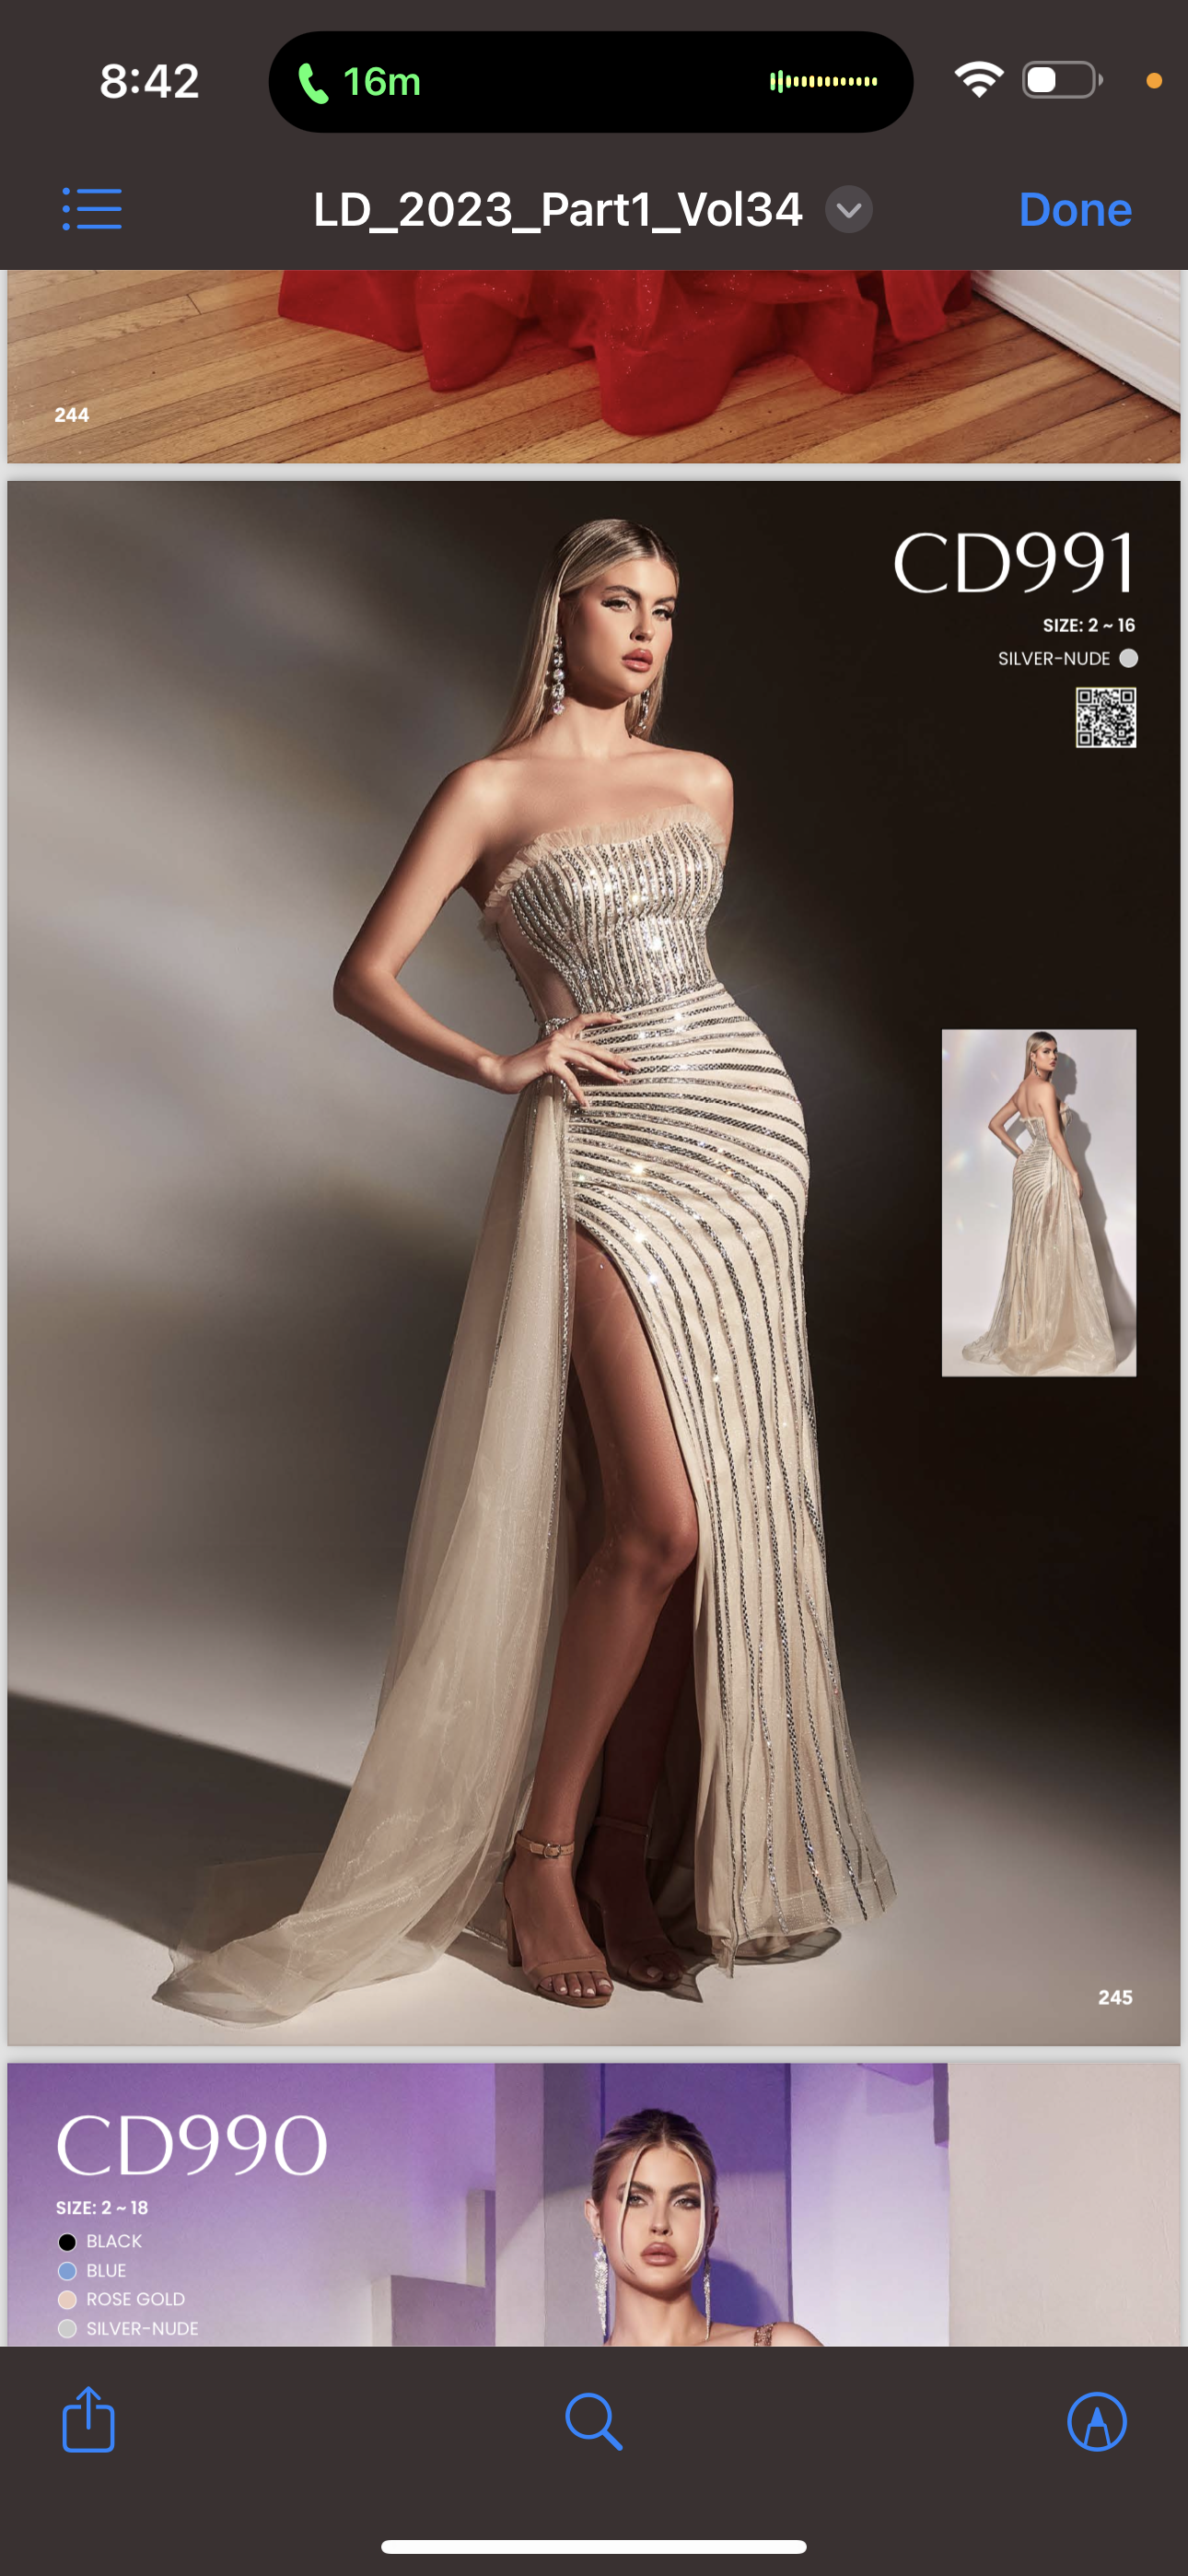 CD991
FITTED NUDE GOWN WITH RIGHT SIDE OVERSKIRT AND RHINESTONE DETAILS